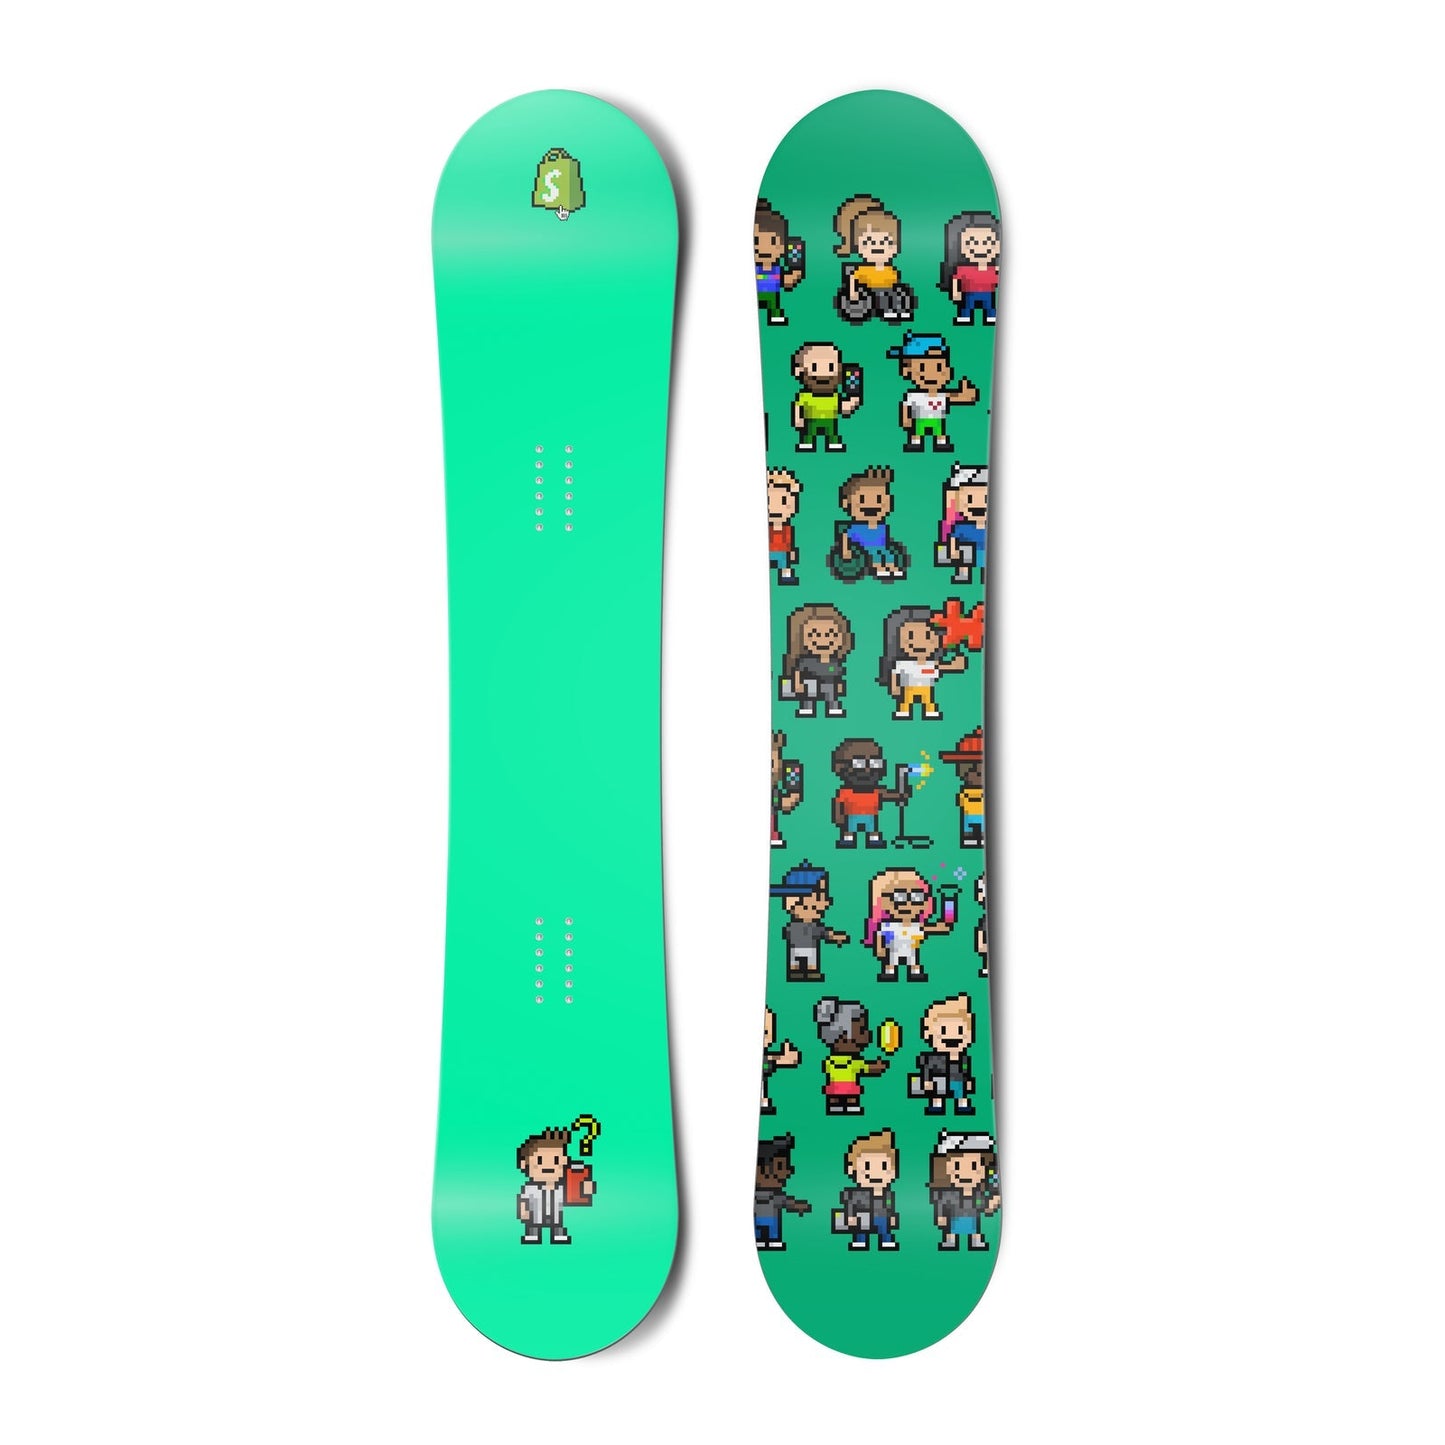 Top and bottom view of a snowboard. The top view shows a pixelated Shopify bag logo and a pixelated
          character reviewing a clipboard with a questioning expression with a bright green-blue background. The bottom
          view is a pattern of many pixel characters with a bright green-blue background.